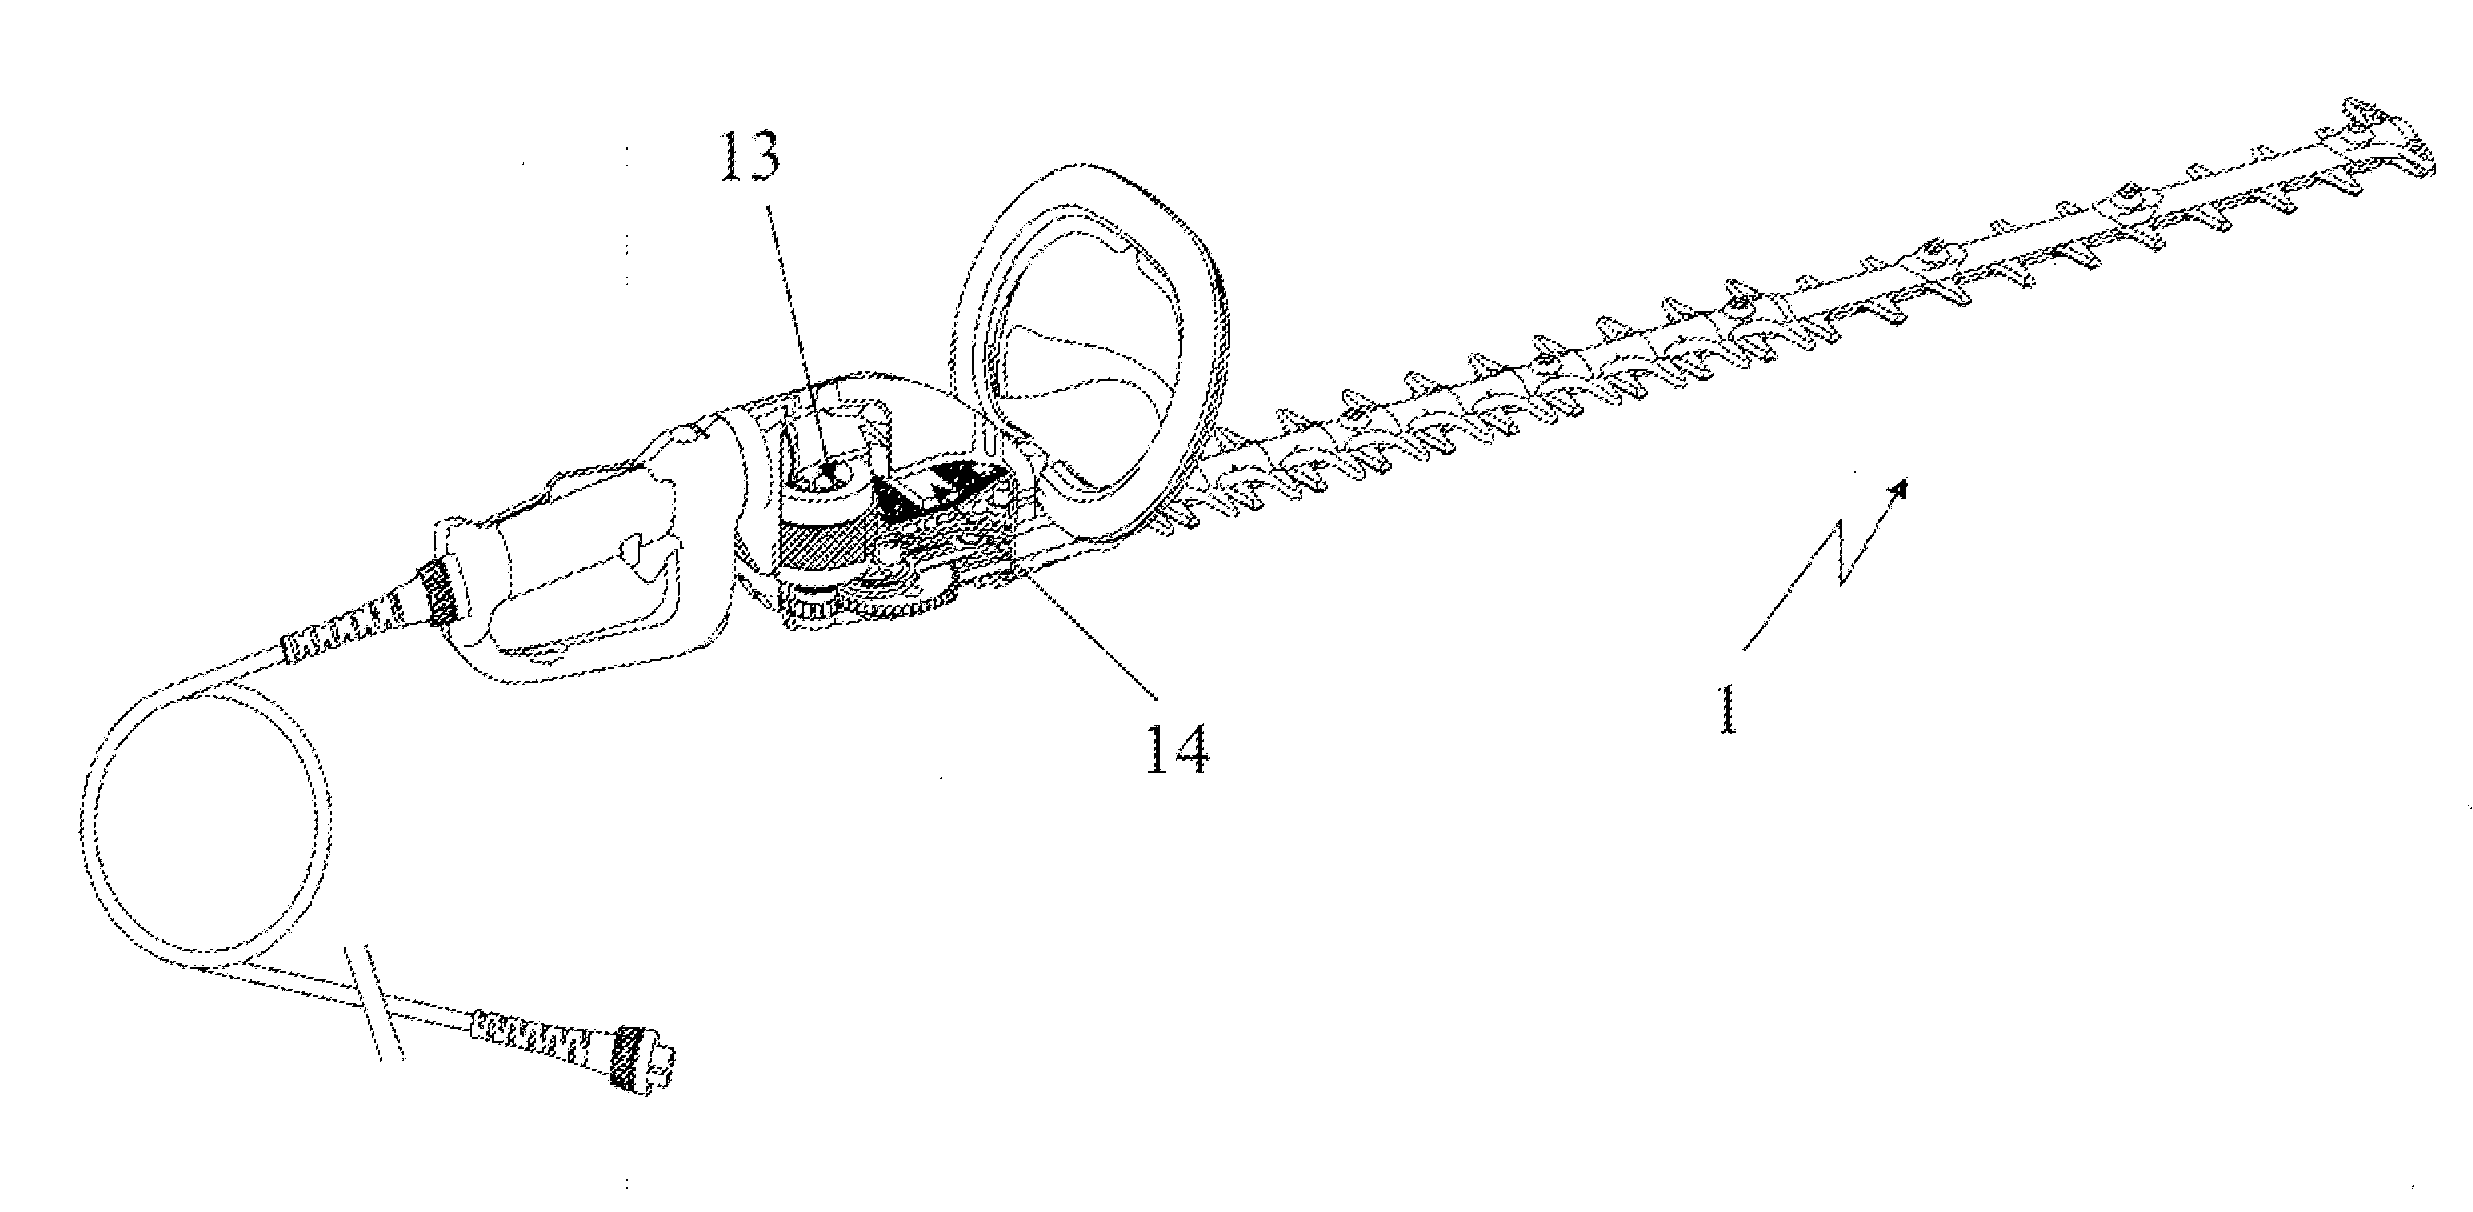 Self-unjamming motorized trimming apparatus, particularly a hedge trimmer